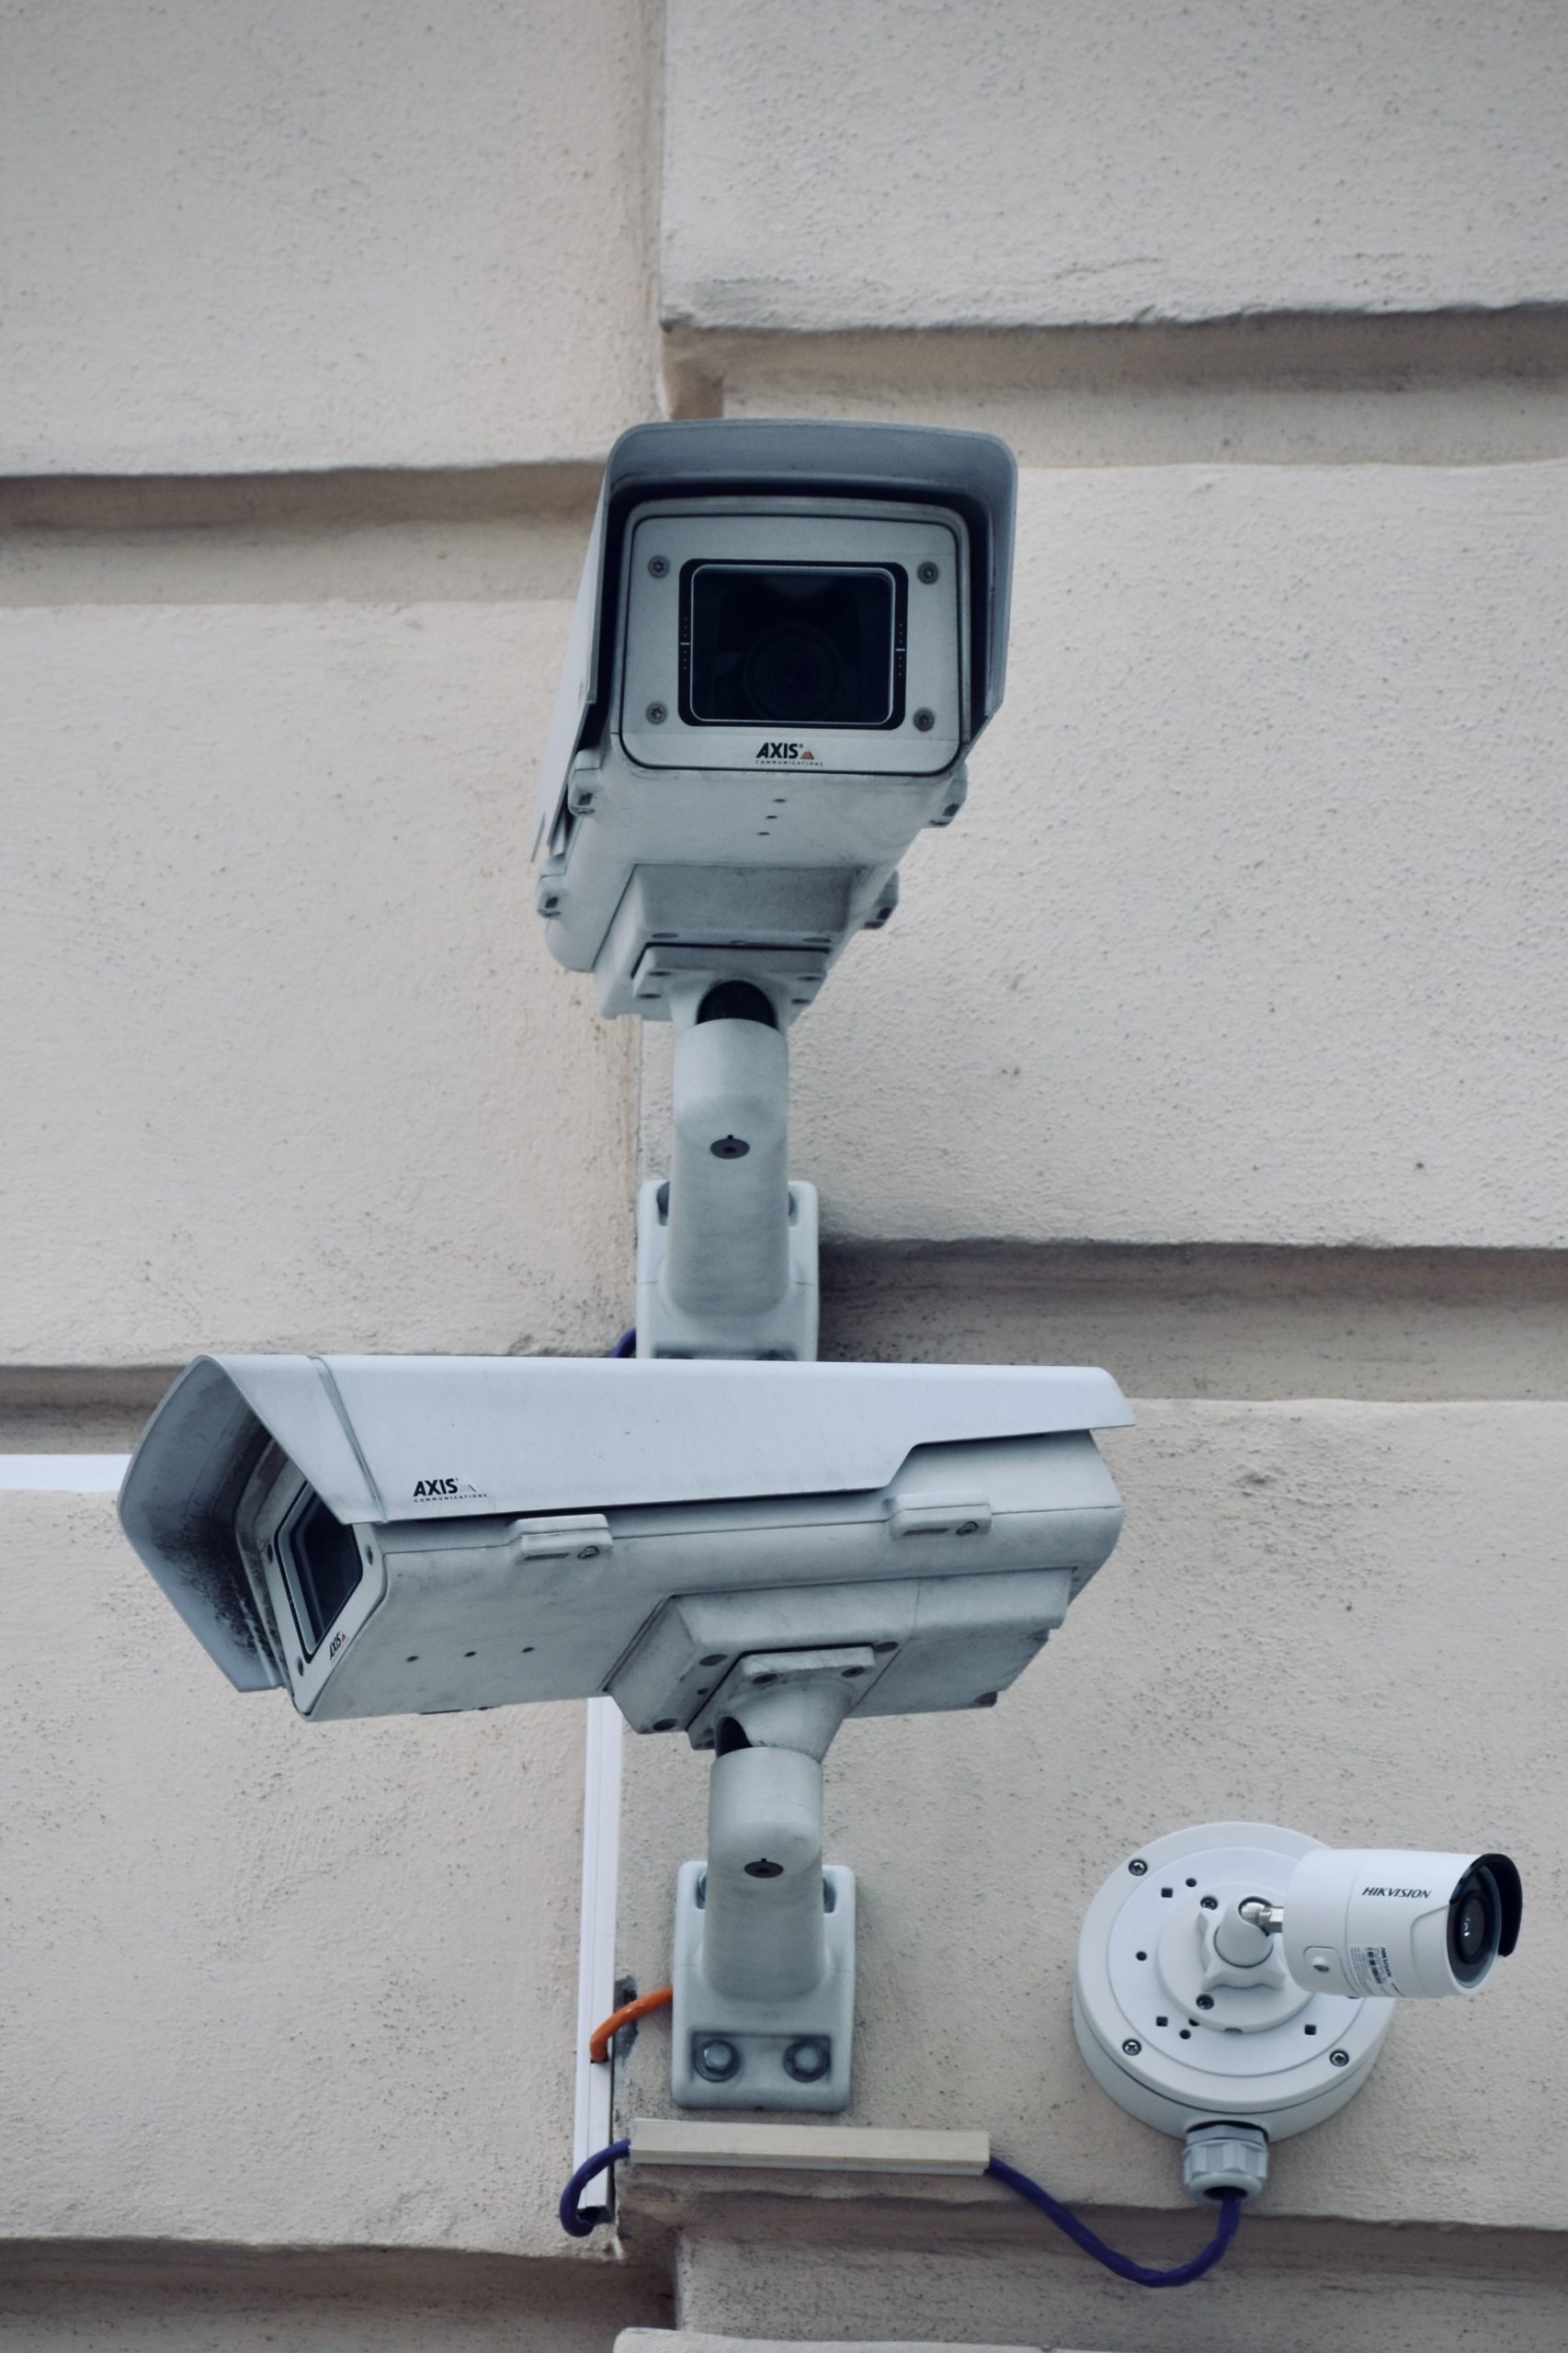 image of security cameras attached to a wall